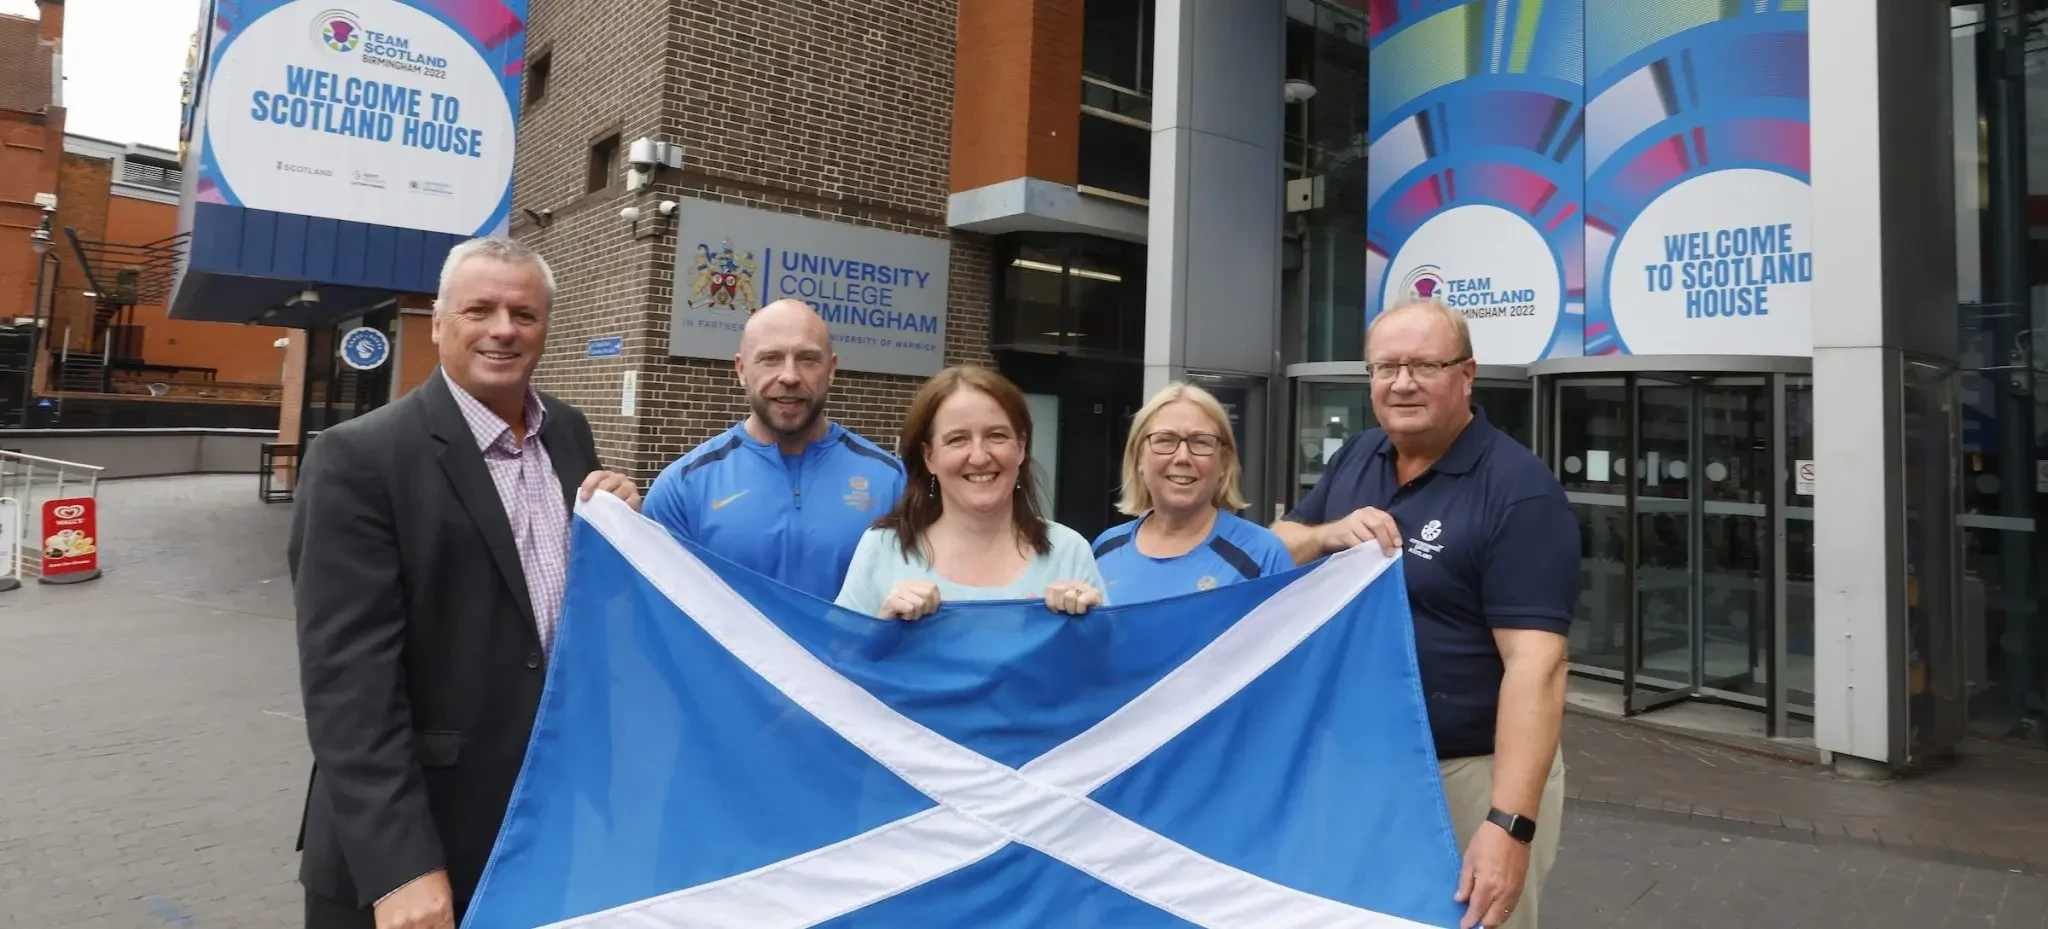 Scottish Minister Todd attends opening of Scotland House at Birmingham 2022